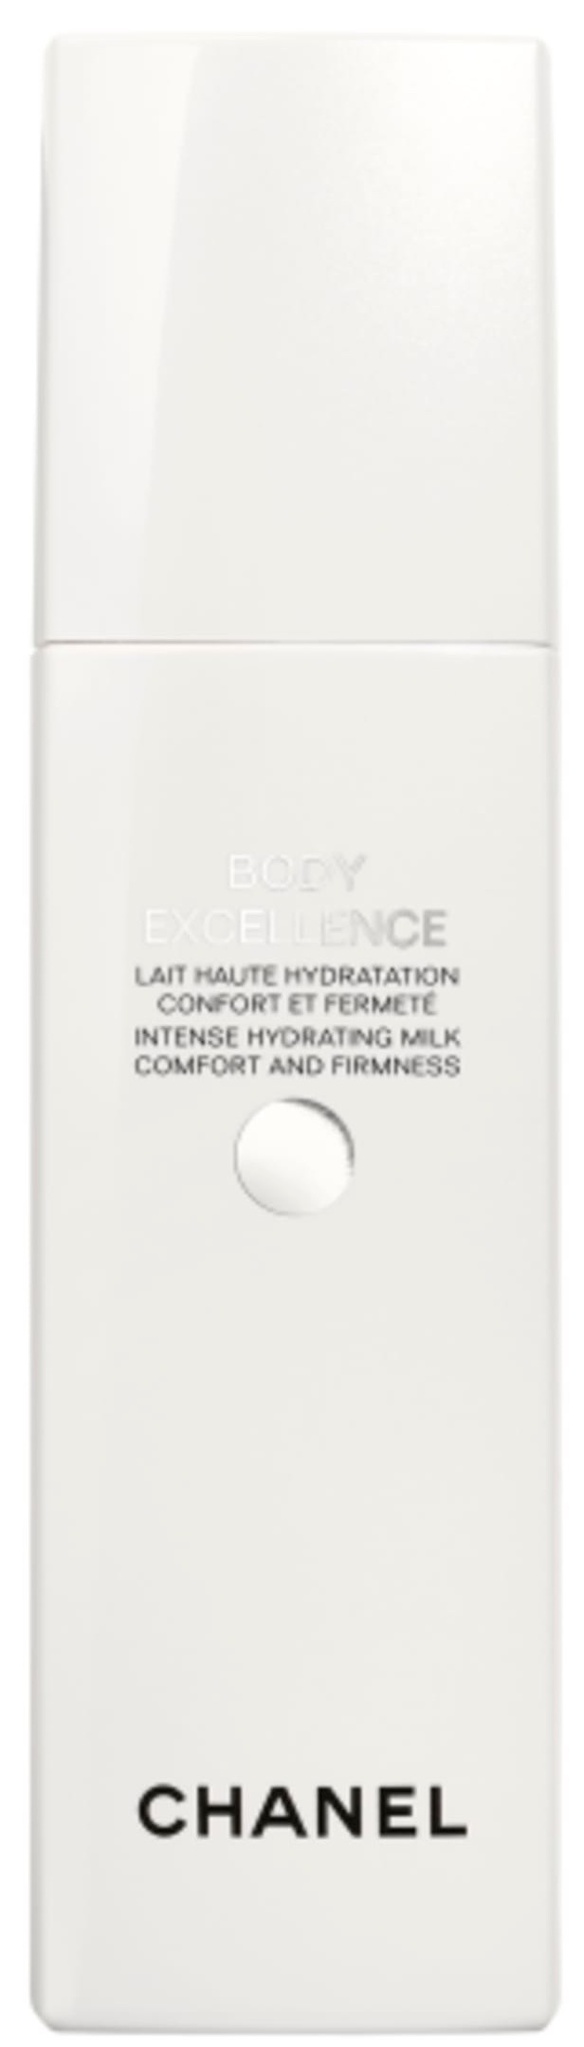 Chanel Body Excellence Intense Hydrating Milk